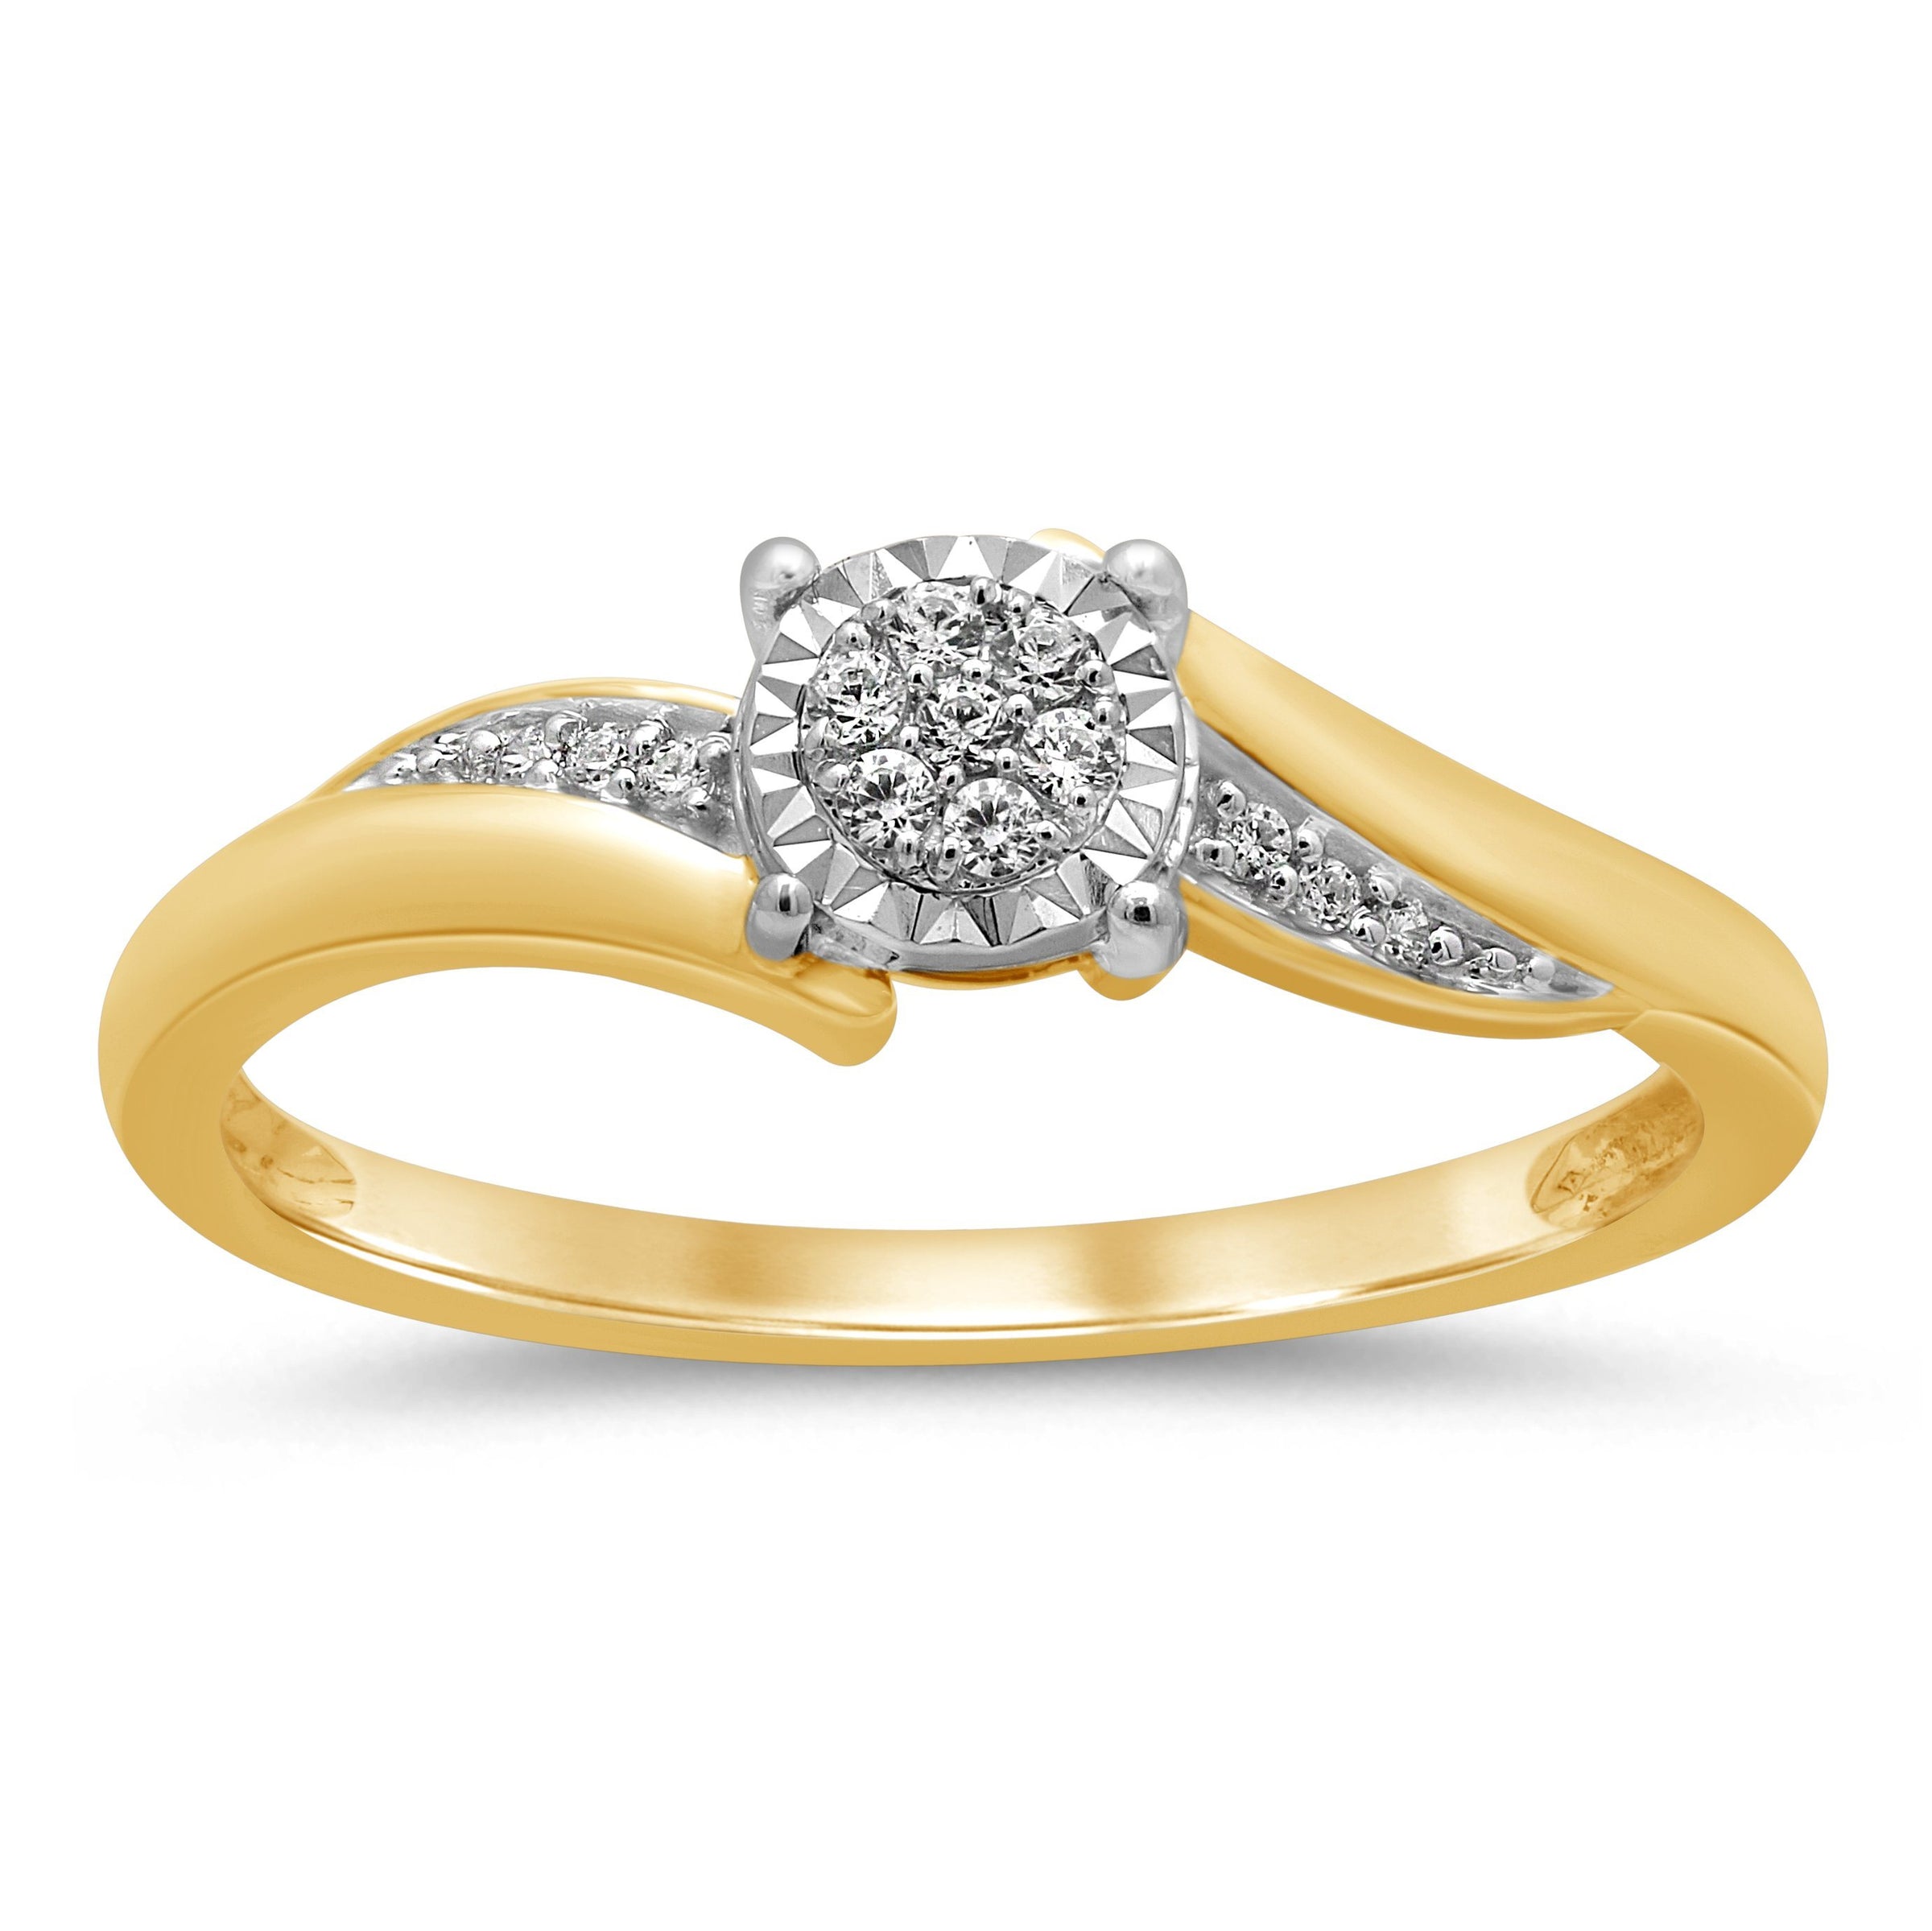 Brilliant Illusion Diamond Set Ring in 9ct Yellow Gold Rings Bevilles 